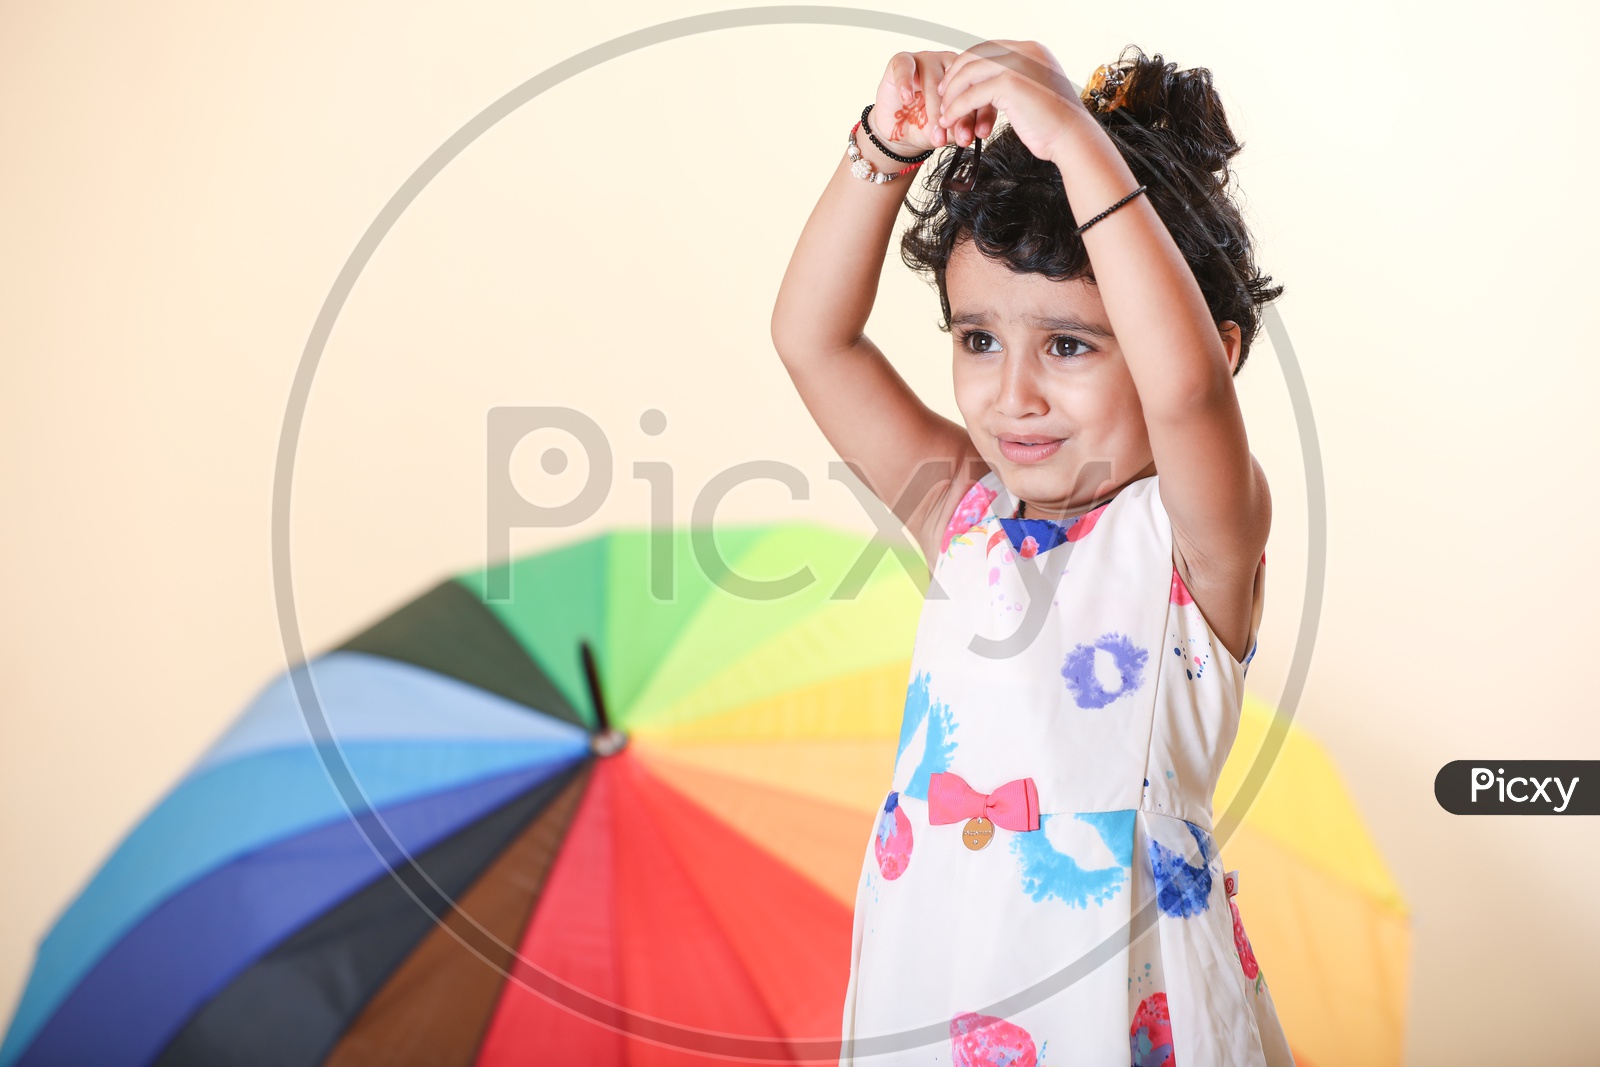 Indian girl dressed in colorful frock playing with her hair with rainbow colored umbrella in the background